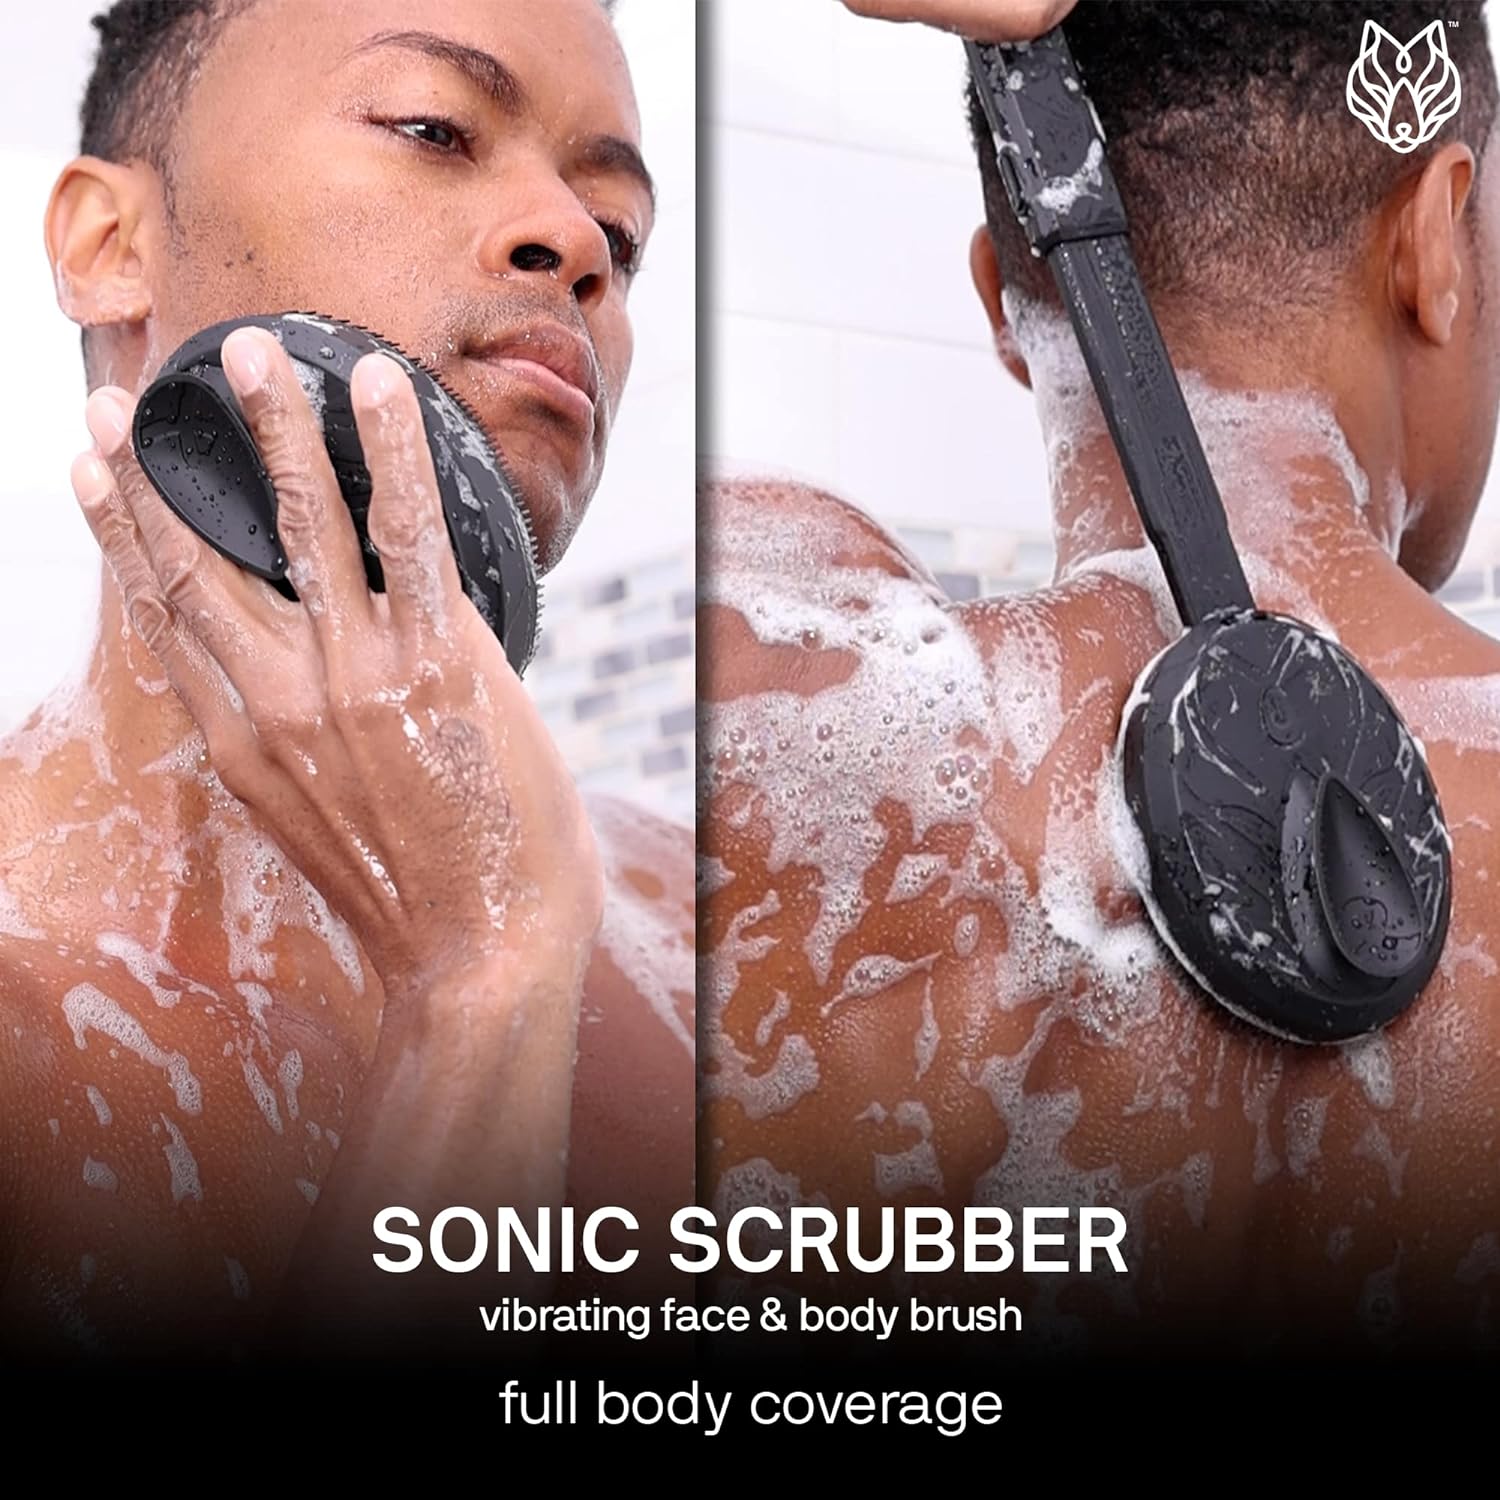 Black Wolf Vibrating Face and Body Brush, Sonic Scrubber Pro - Water Resistant, 4 Settings, 2 Speeds & 2 Modes, Massage Brush with Charcoal Infused Silicone Bristles for Deep Clean : Beauty & Personal Care